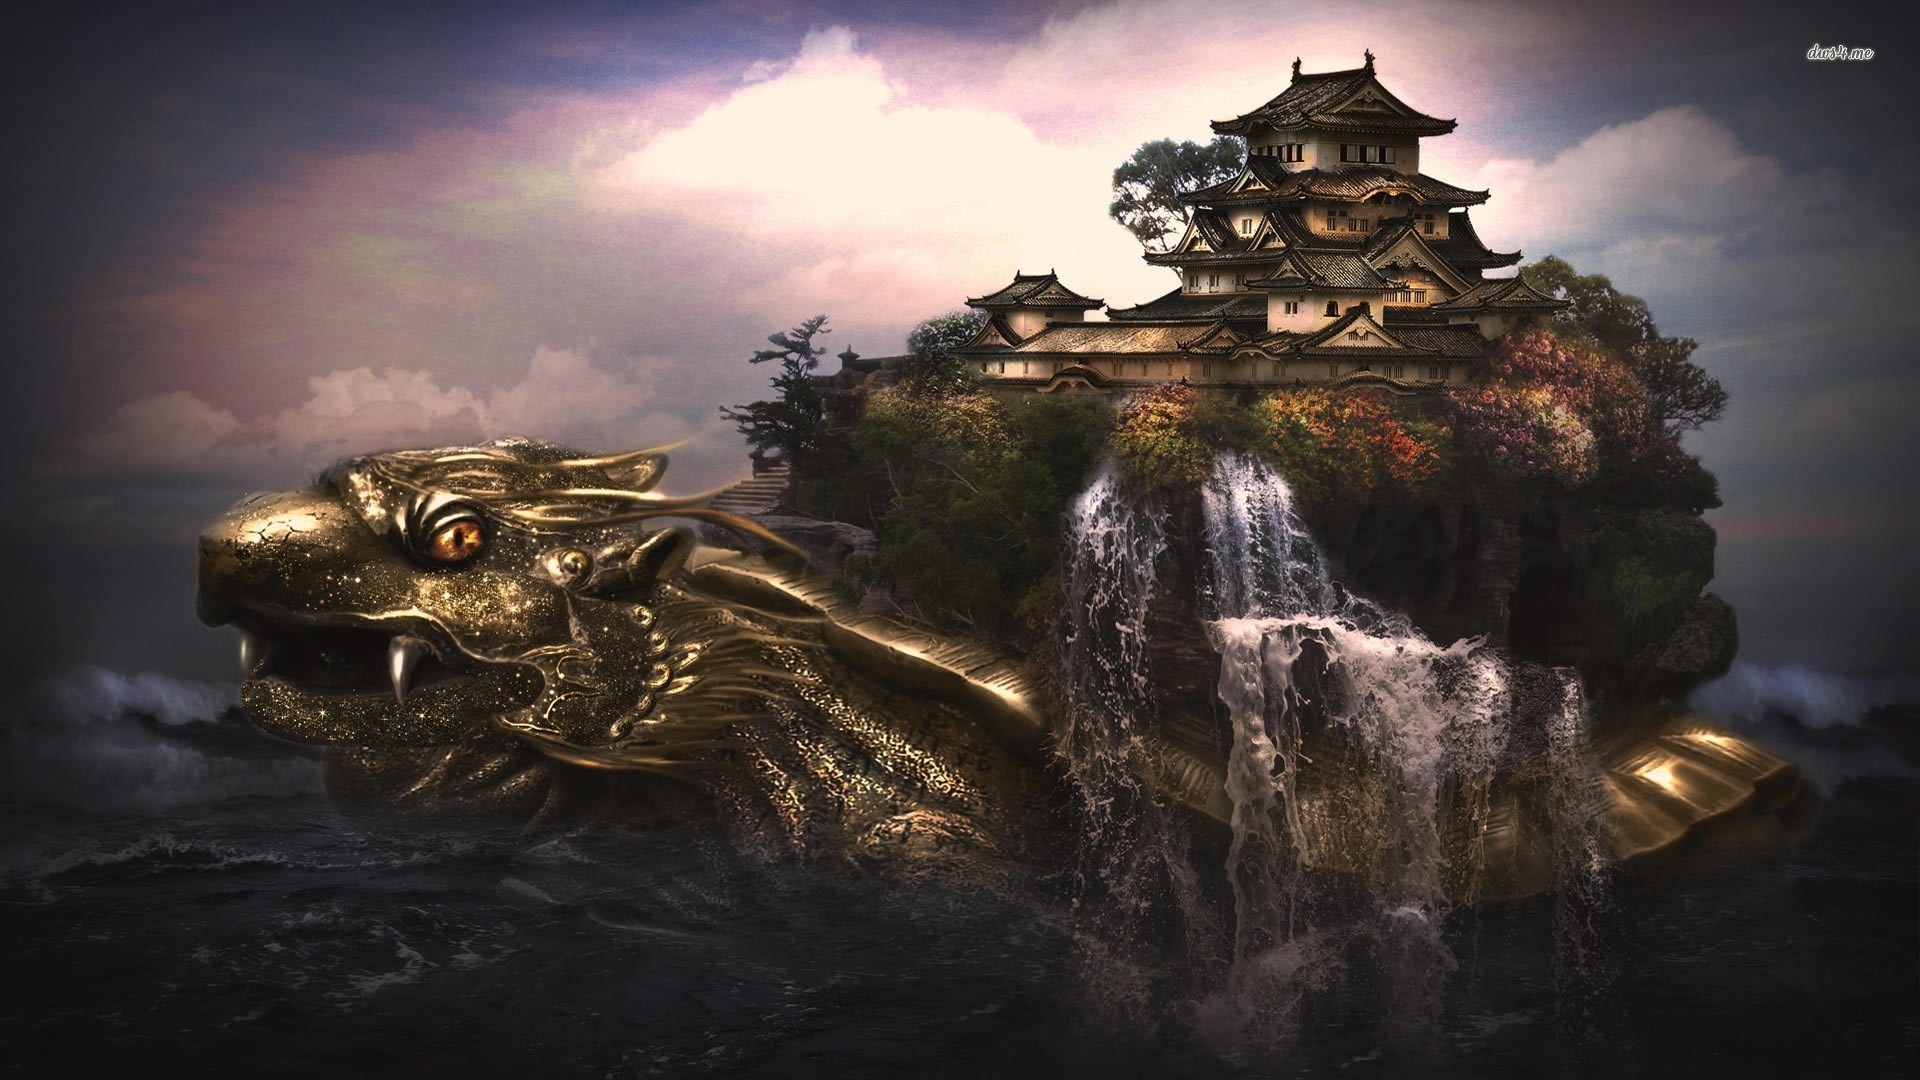 1920x1080 Name: 18727-dragon-carrying-the-temple--digital-